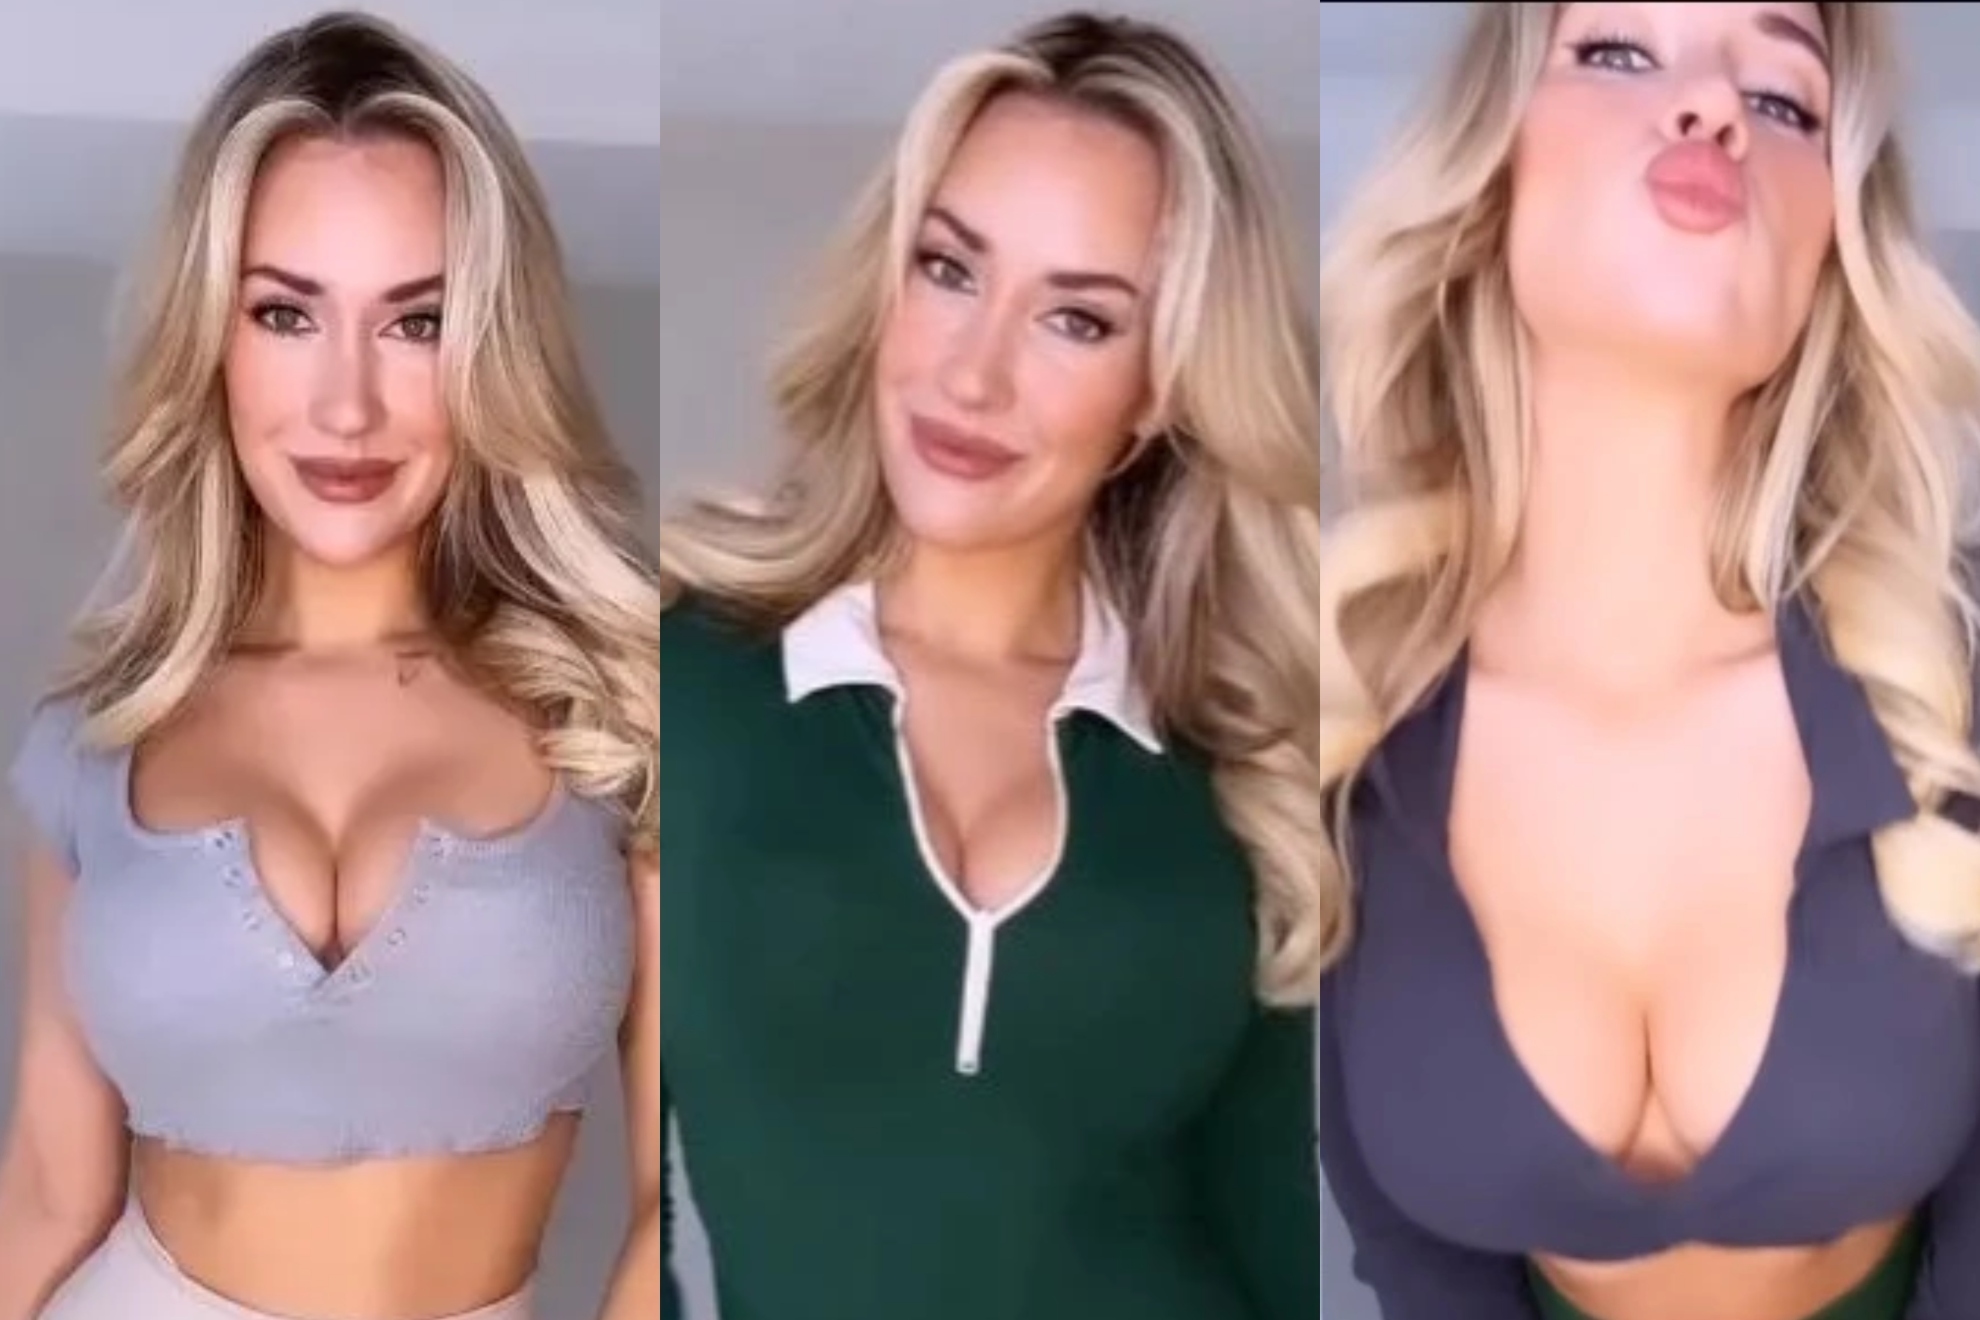 Paige Spiranac shows off her seven golf girl outfits on IG